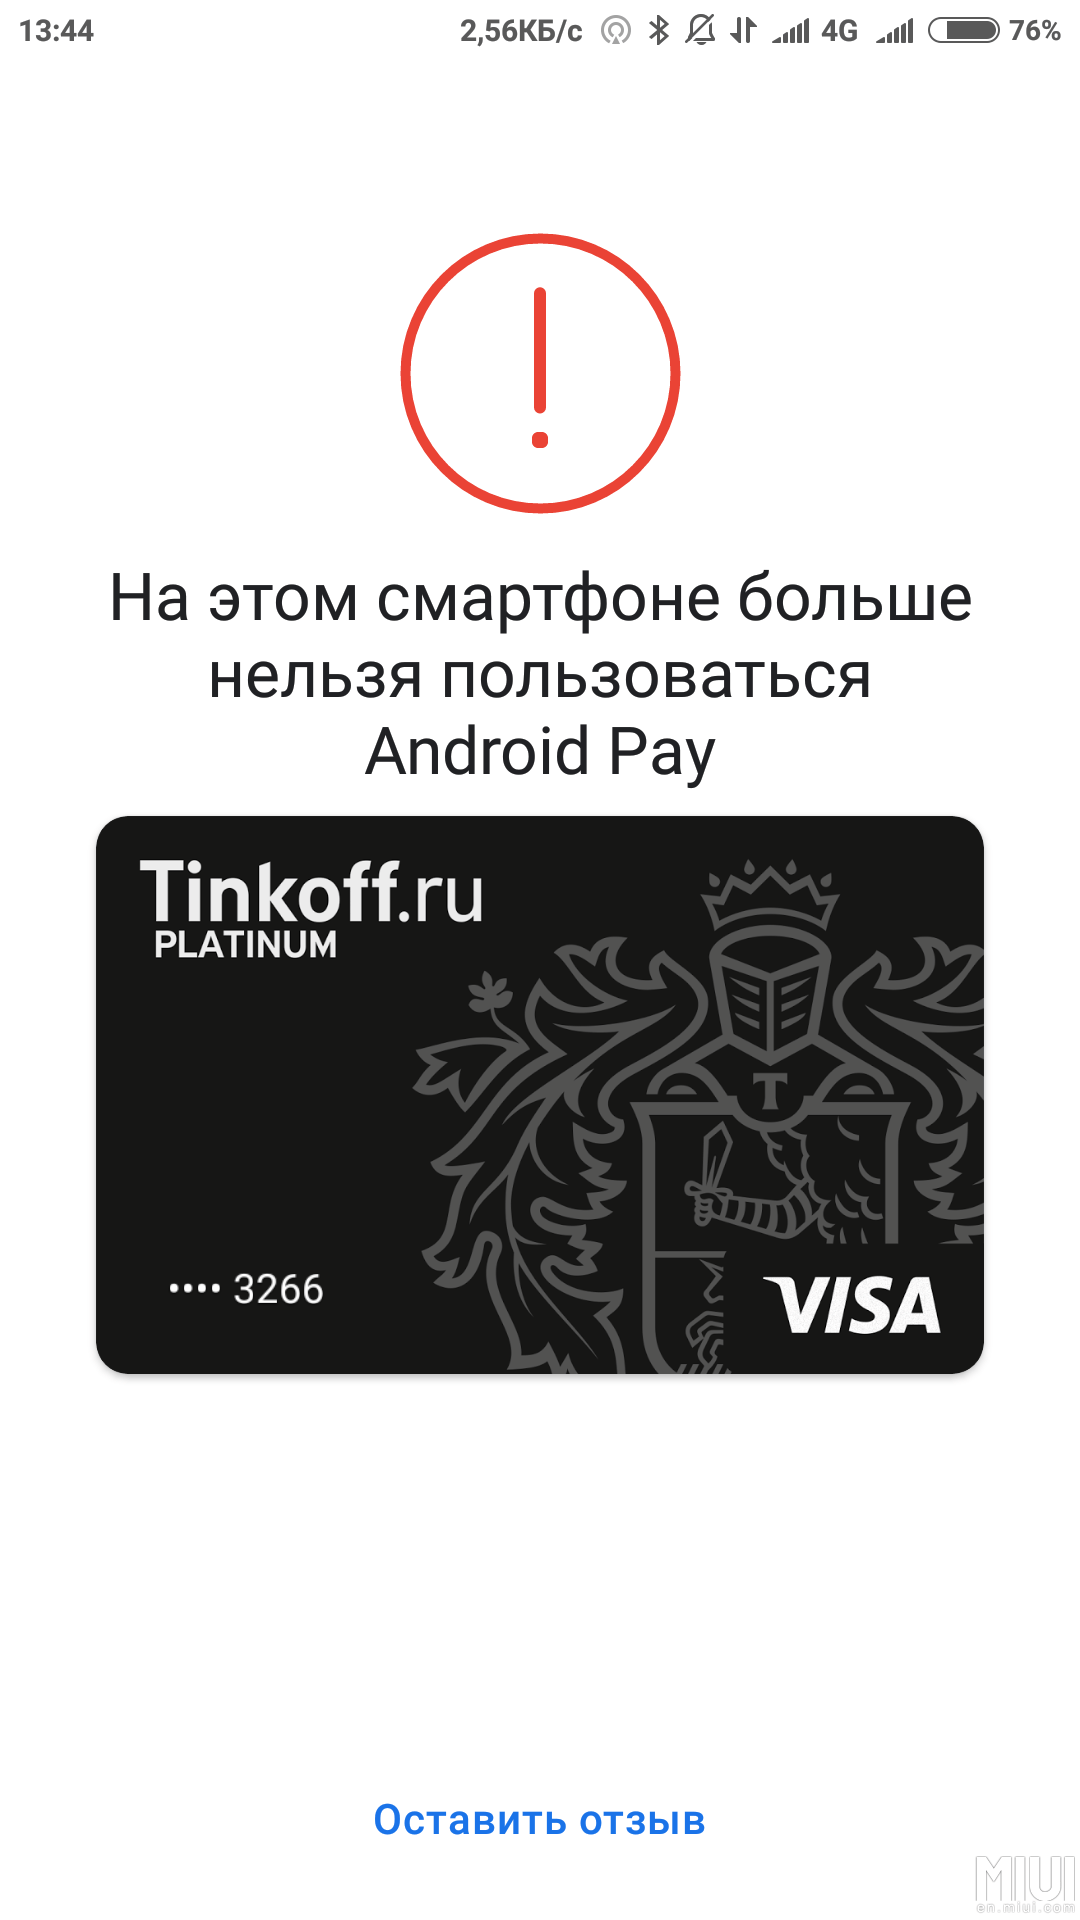 Official Android Pay Logo - Android pay not working - Xiaomi Mi 5/Pro - Xiaomi MIUI Official Forum